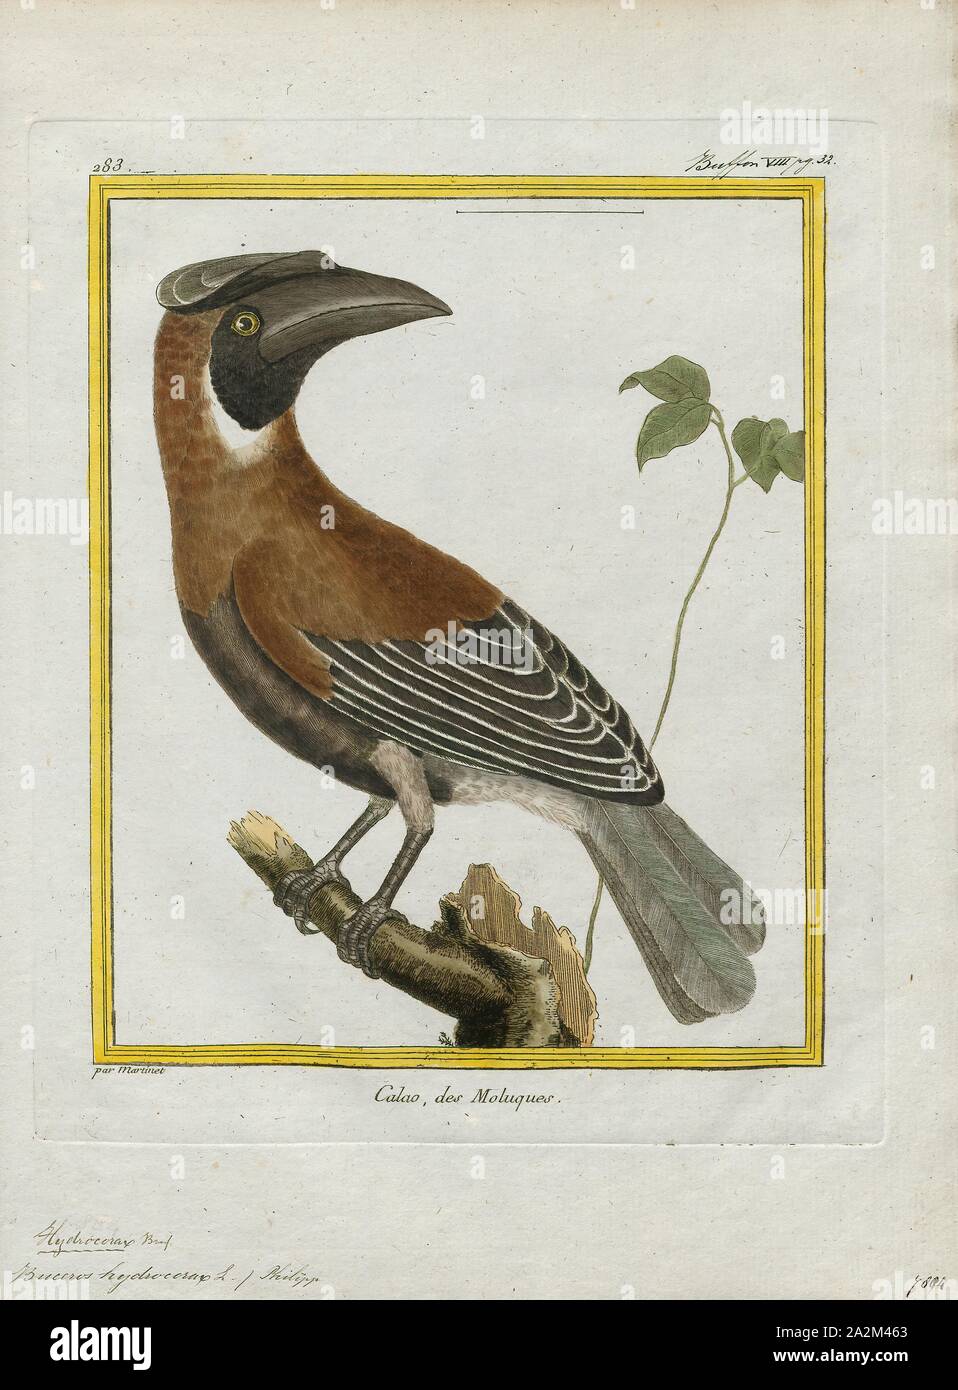 Buceros hydrocorax, Print, The rufous hornbill (Buceros hydrocorax), also known as the Philippine hornbill and locally as kalaw (pronounced kah-lau), is a large species of hornbill., 1700-1880 Stock Photo